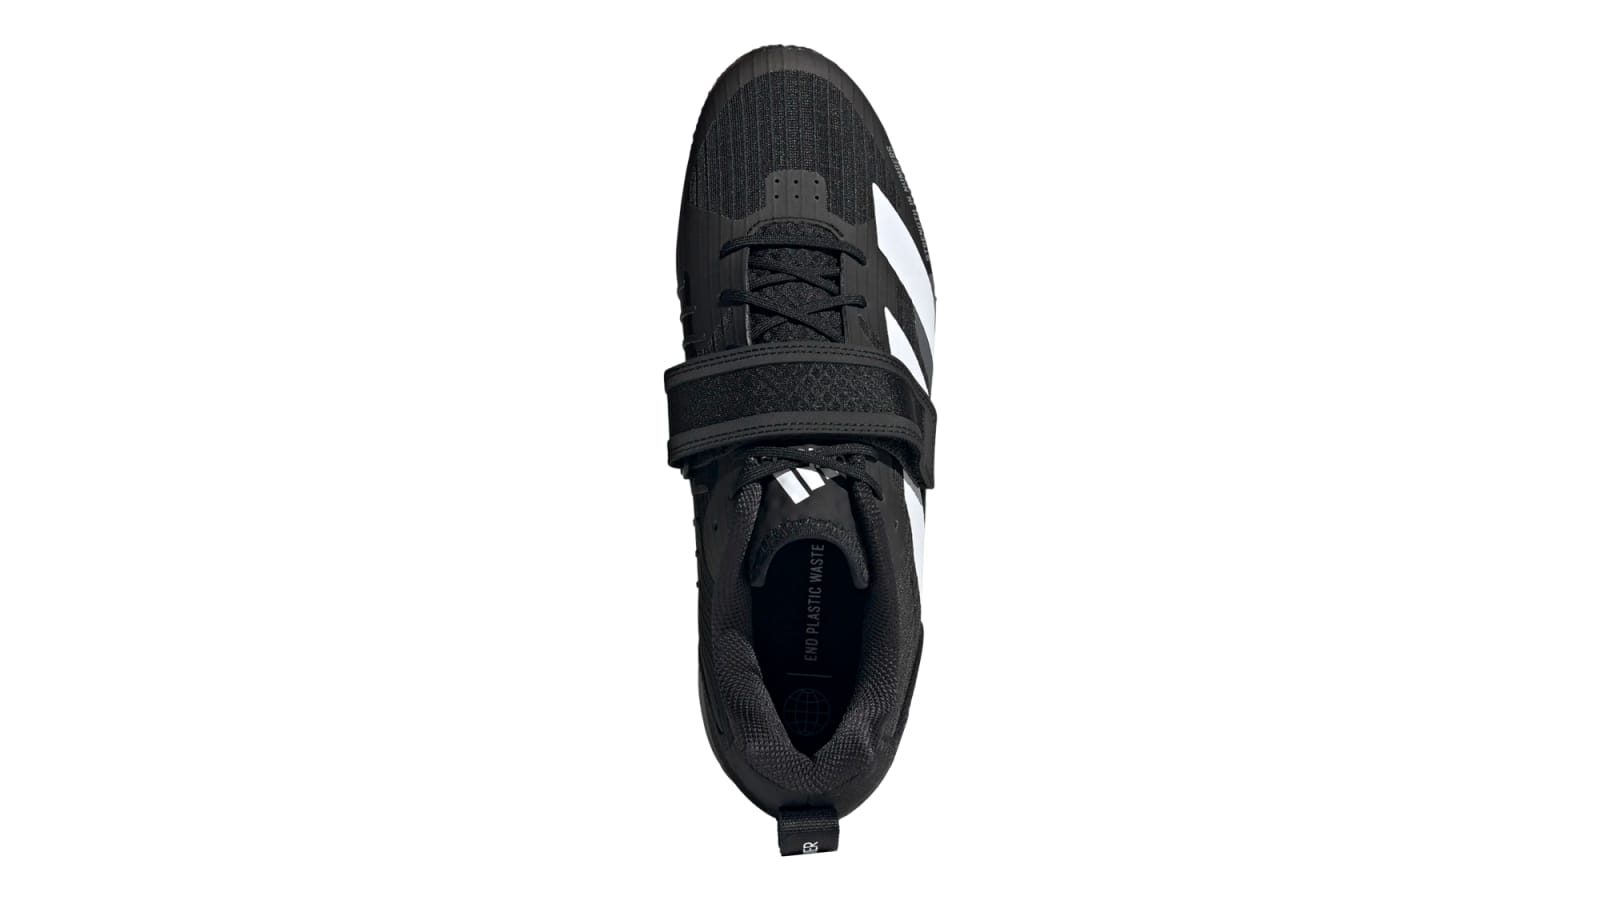 Adidas III Weightlifting Shoes Core Black / Ftwr White / Gray Three | Rogue Fitness